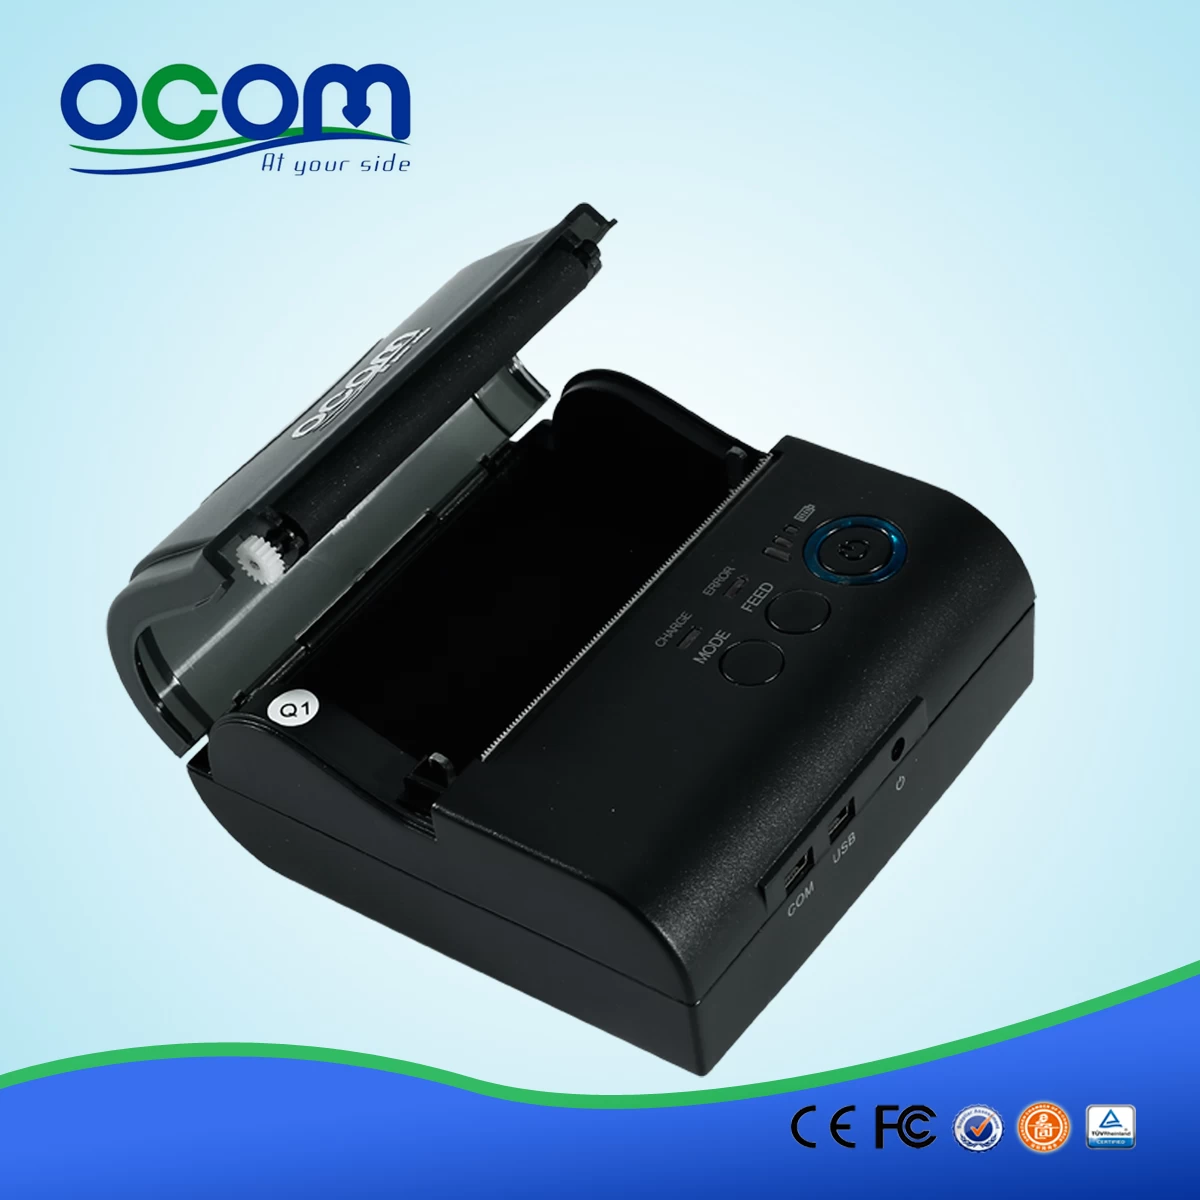 80mm mini Bluetooth Receipt Printer for Android or iOS